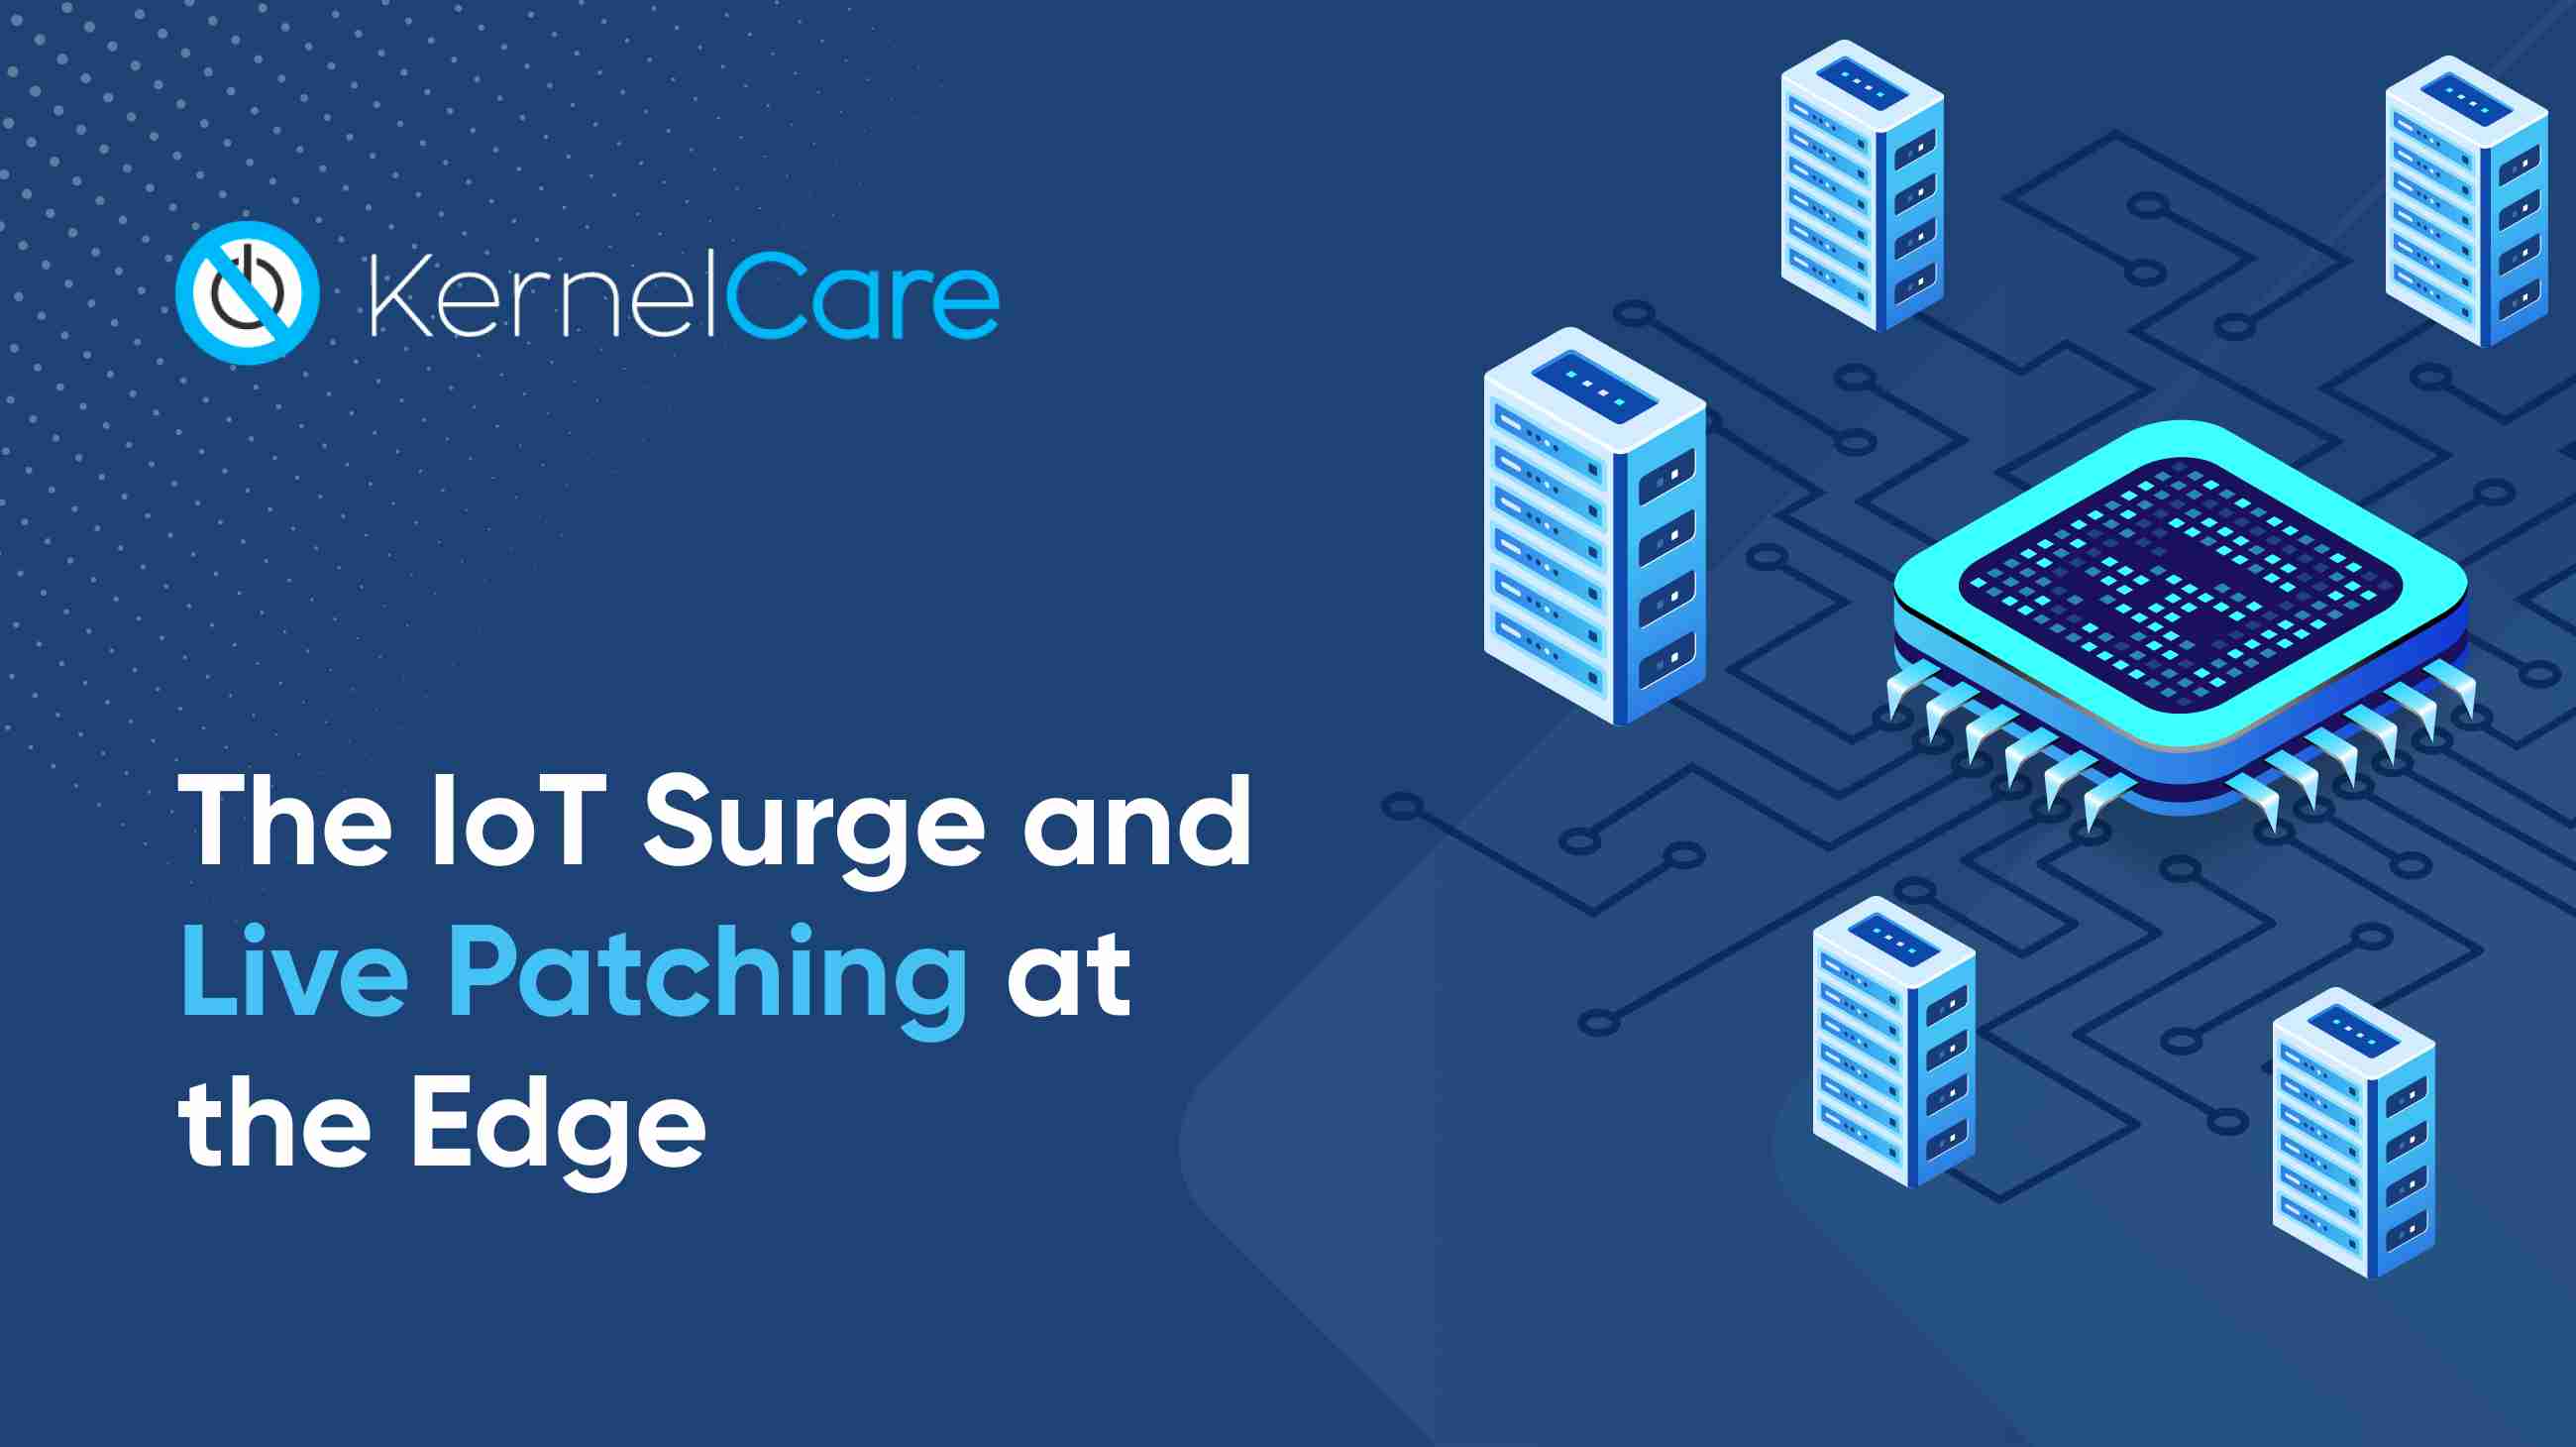 The IoT surge and live patching at the edge